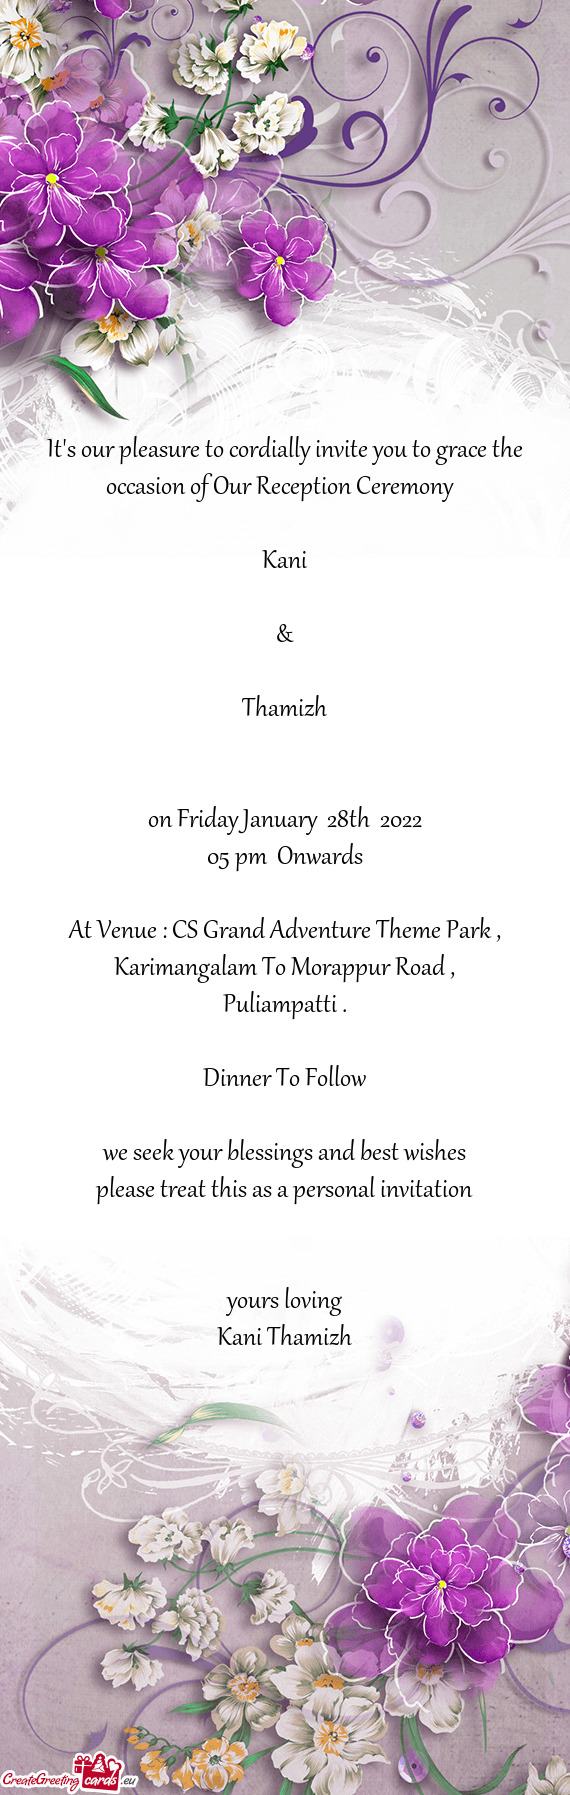 &
 
 Thamizh
 
 
 on Friday January 28th 2022
 05 pm Onwards
 
 At Venue